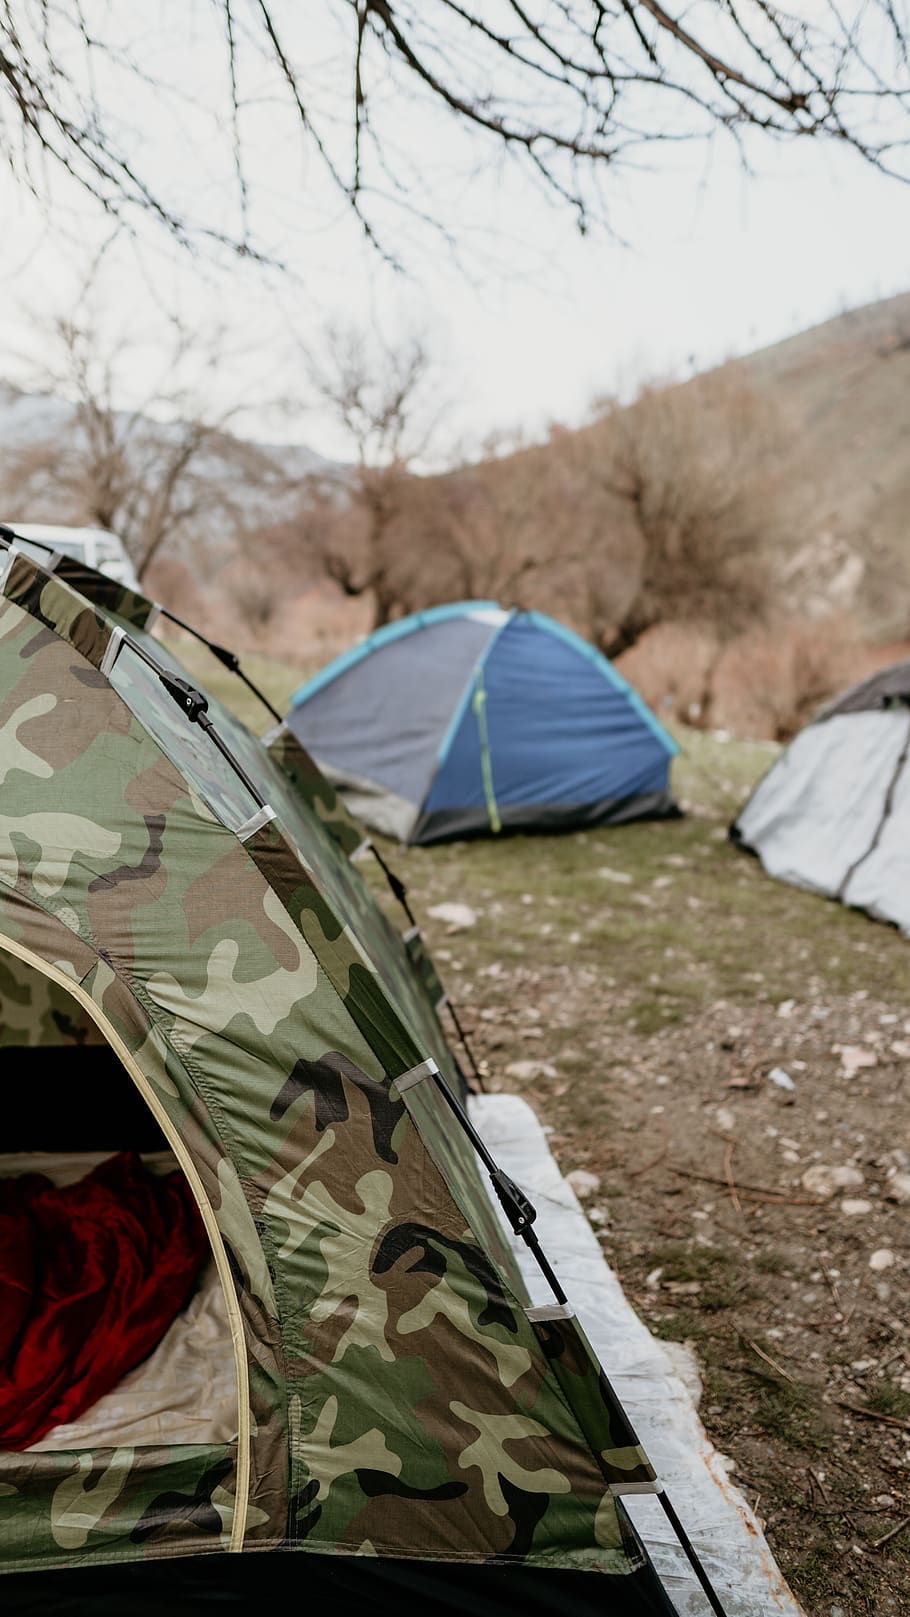 camping, mountain tent, leisure activities, military, military uniform